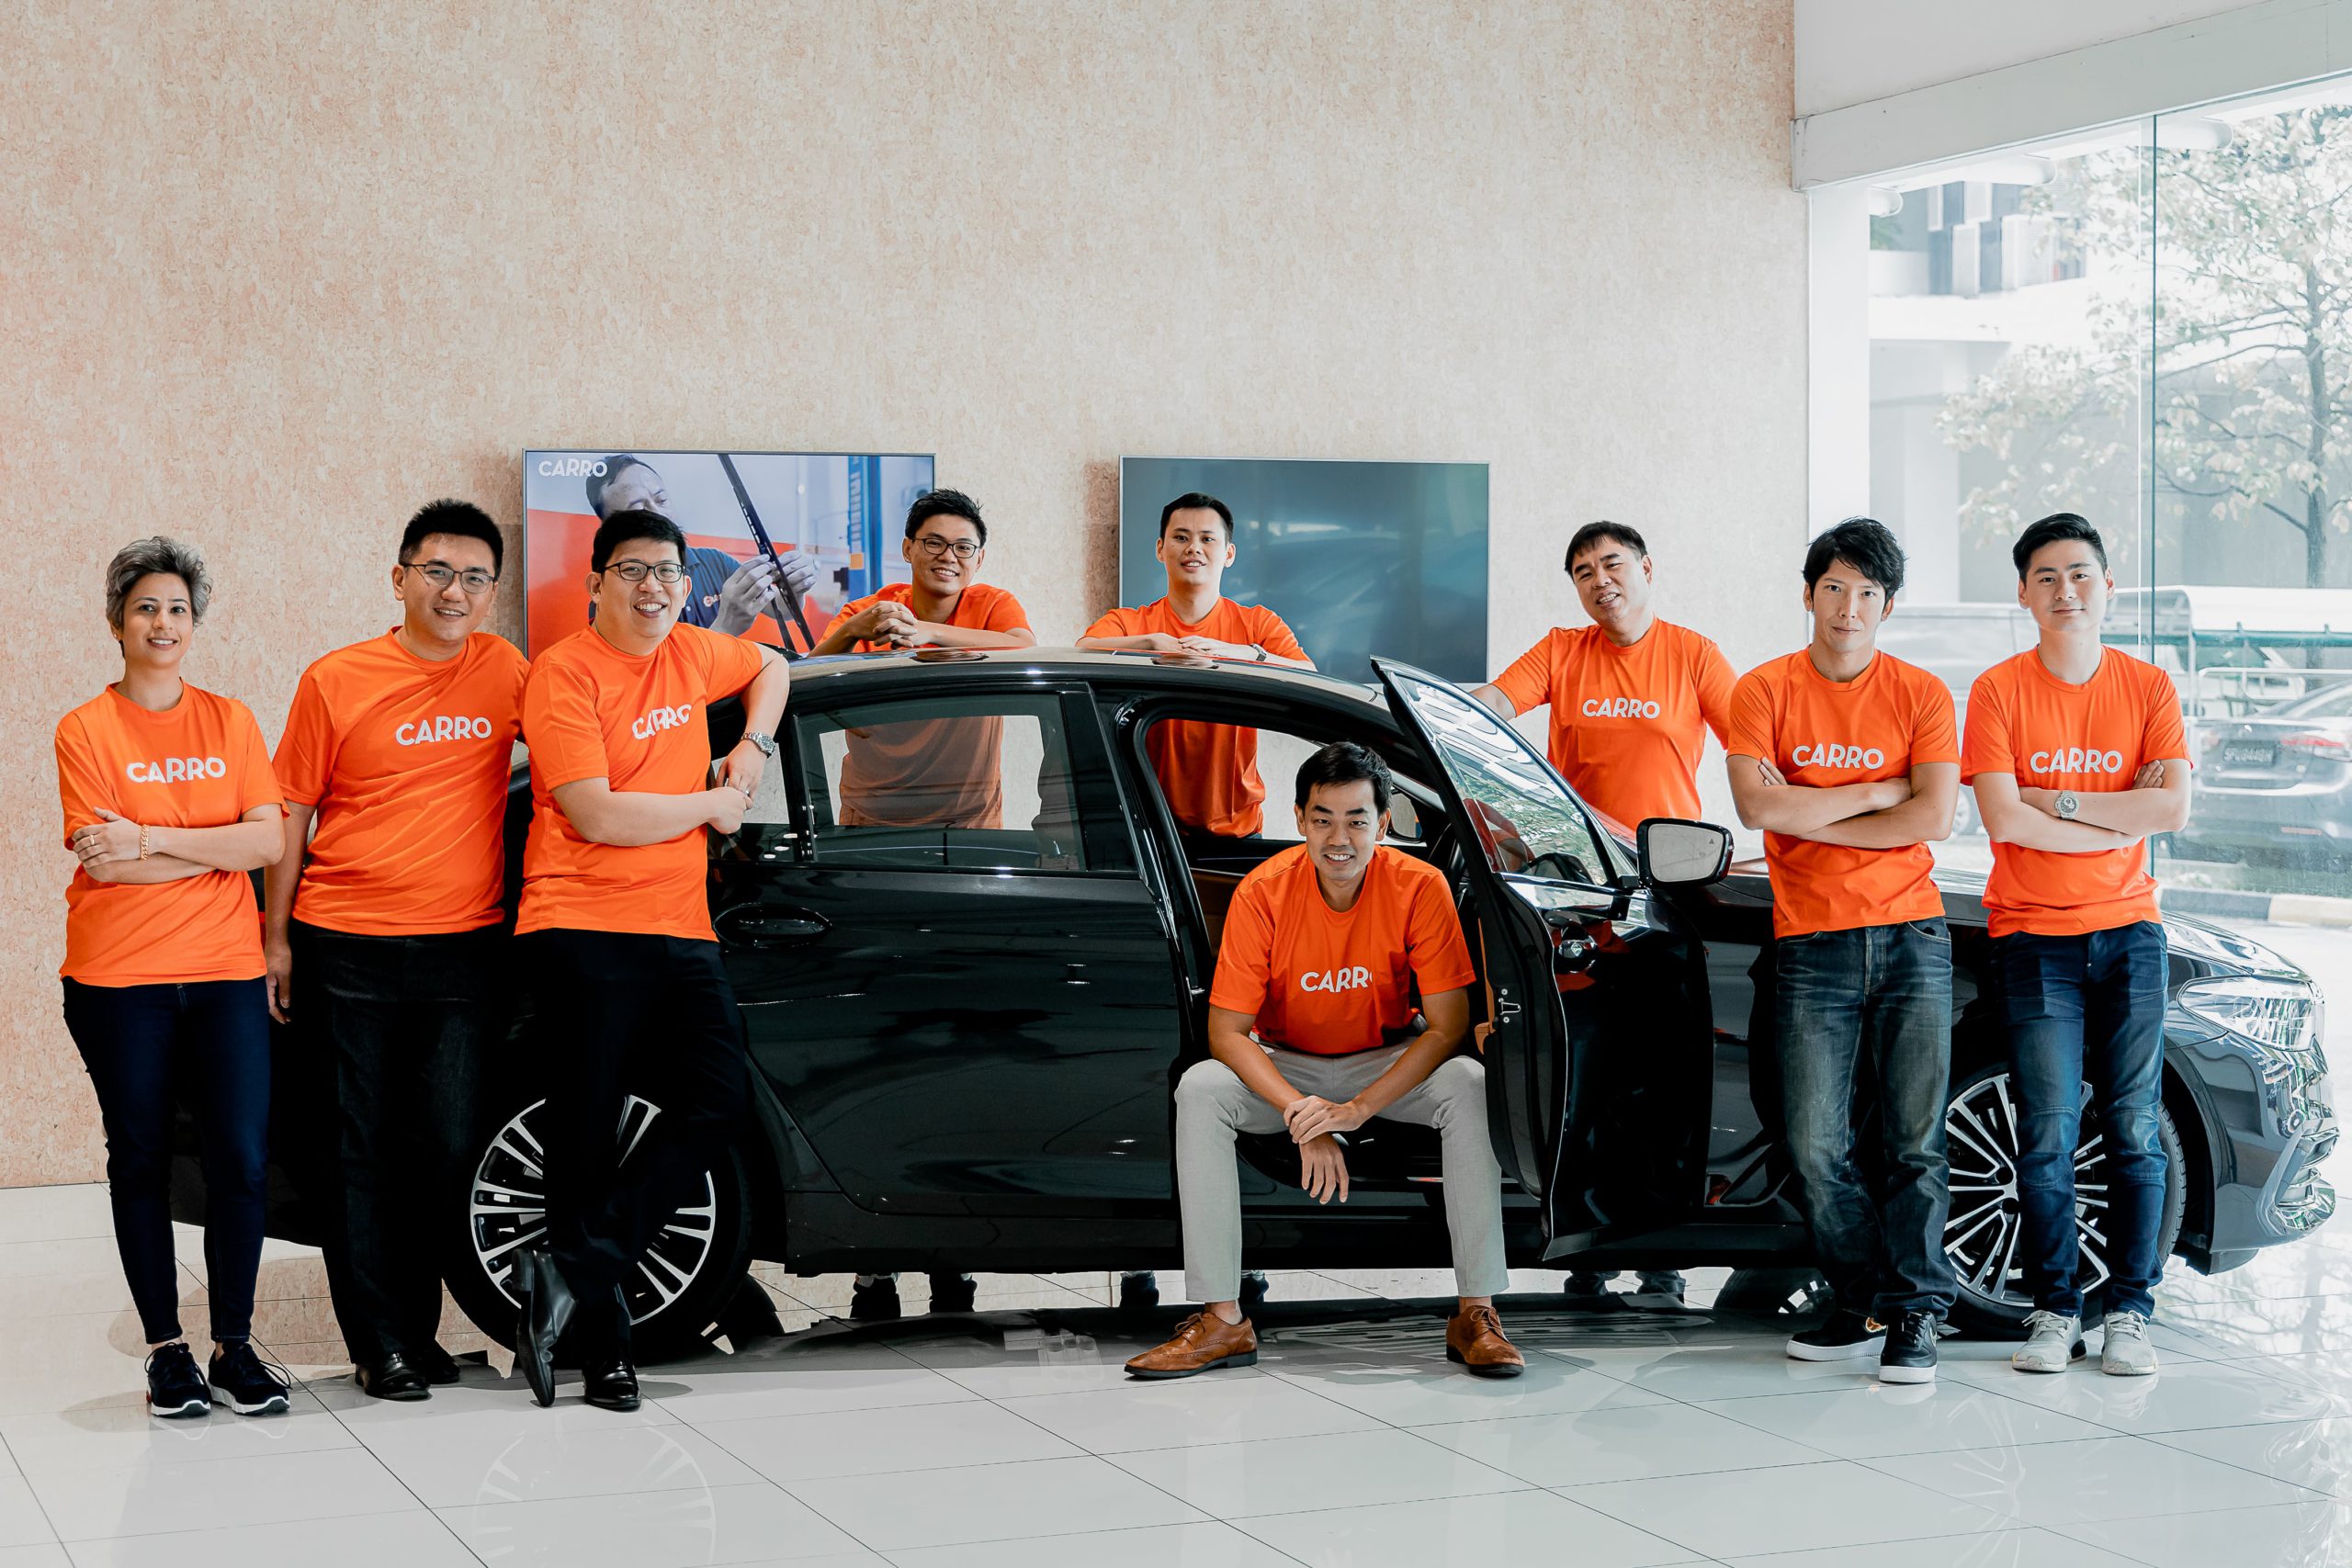 Carro’s unicorn status intensifies competition between Southeast Asia’s car marketplaces